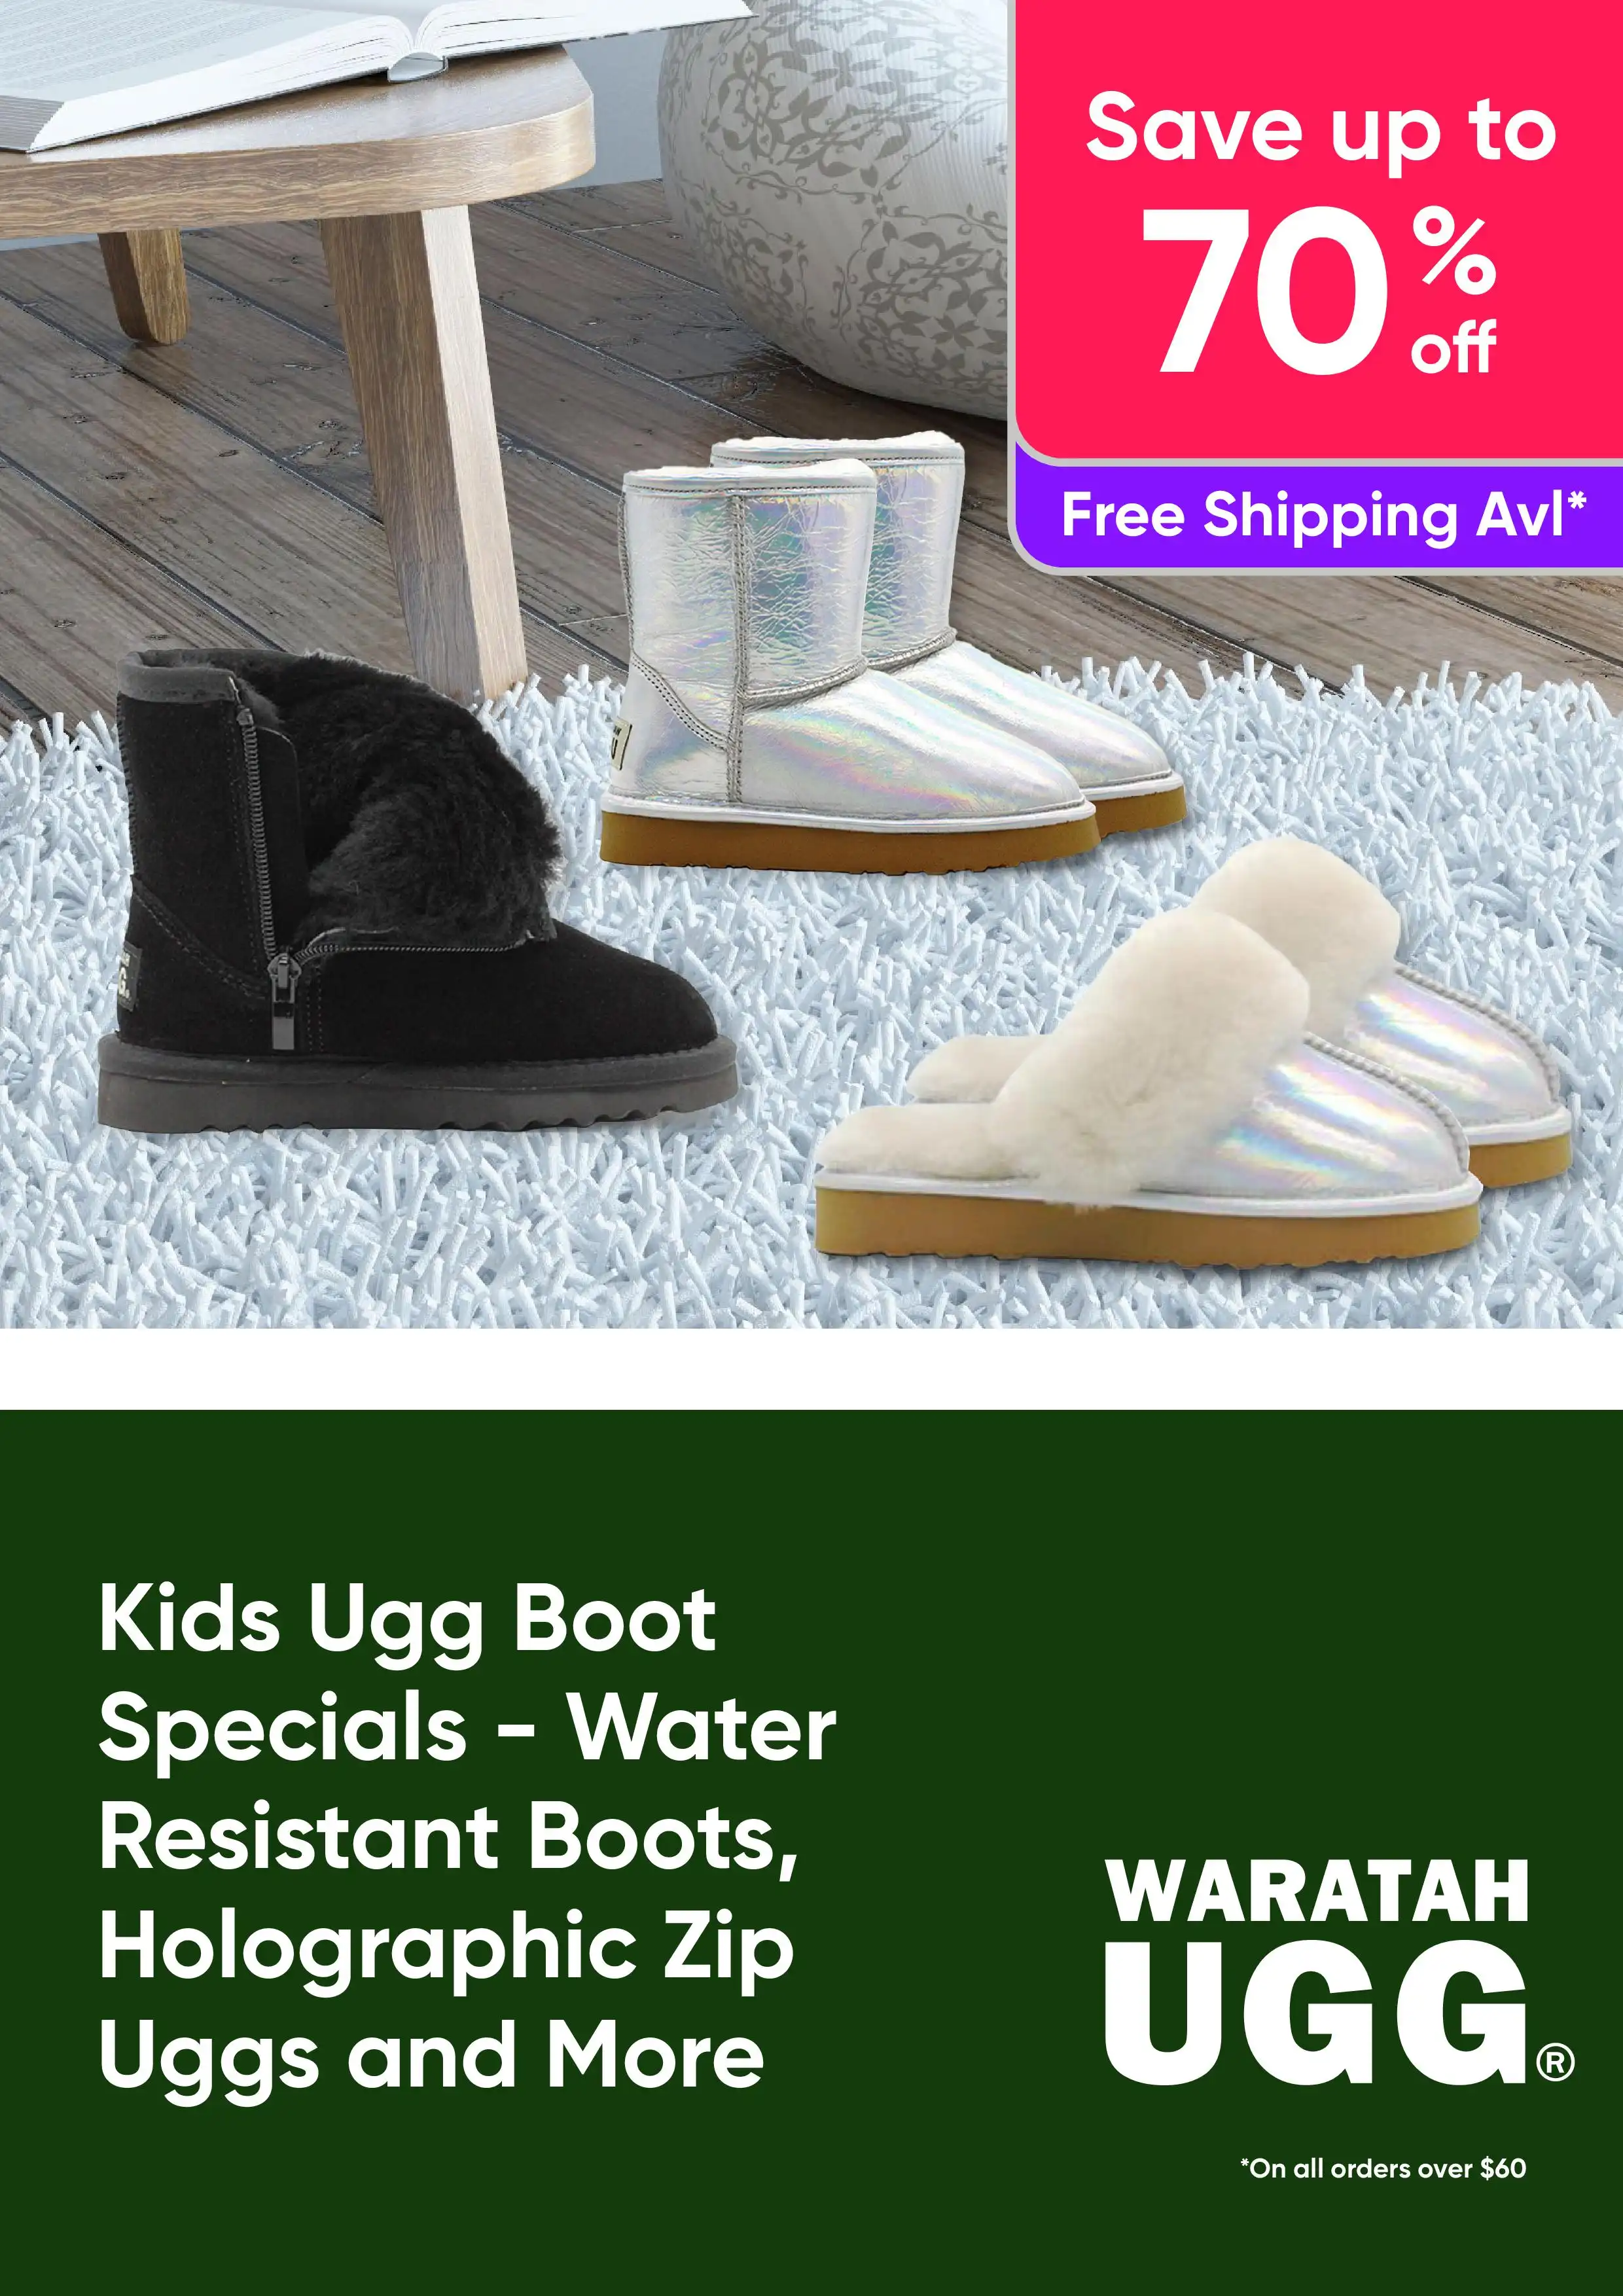 Kids Ugg Boots Specials by Waratah UGG - Save up to 70% Off